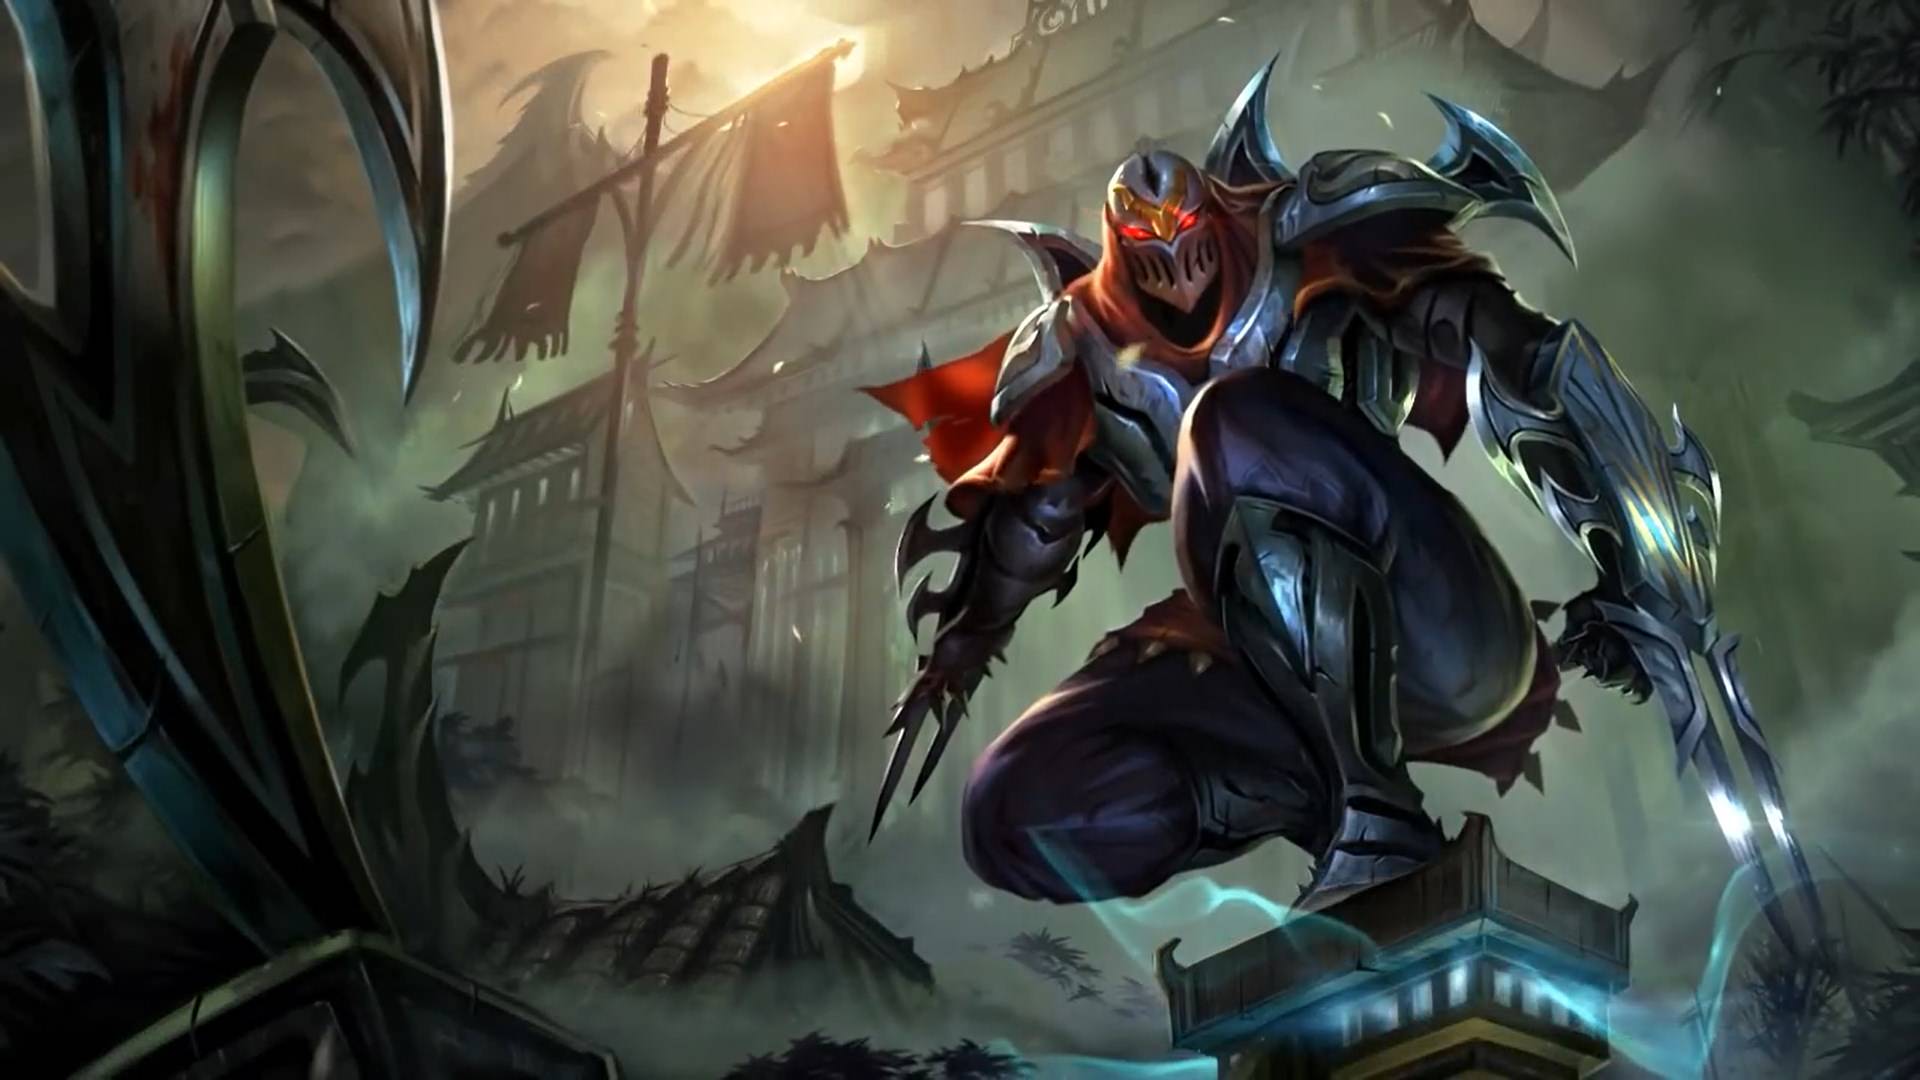 A picture of Zed